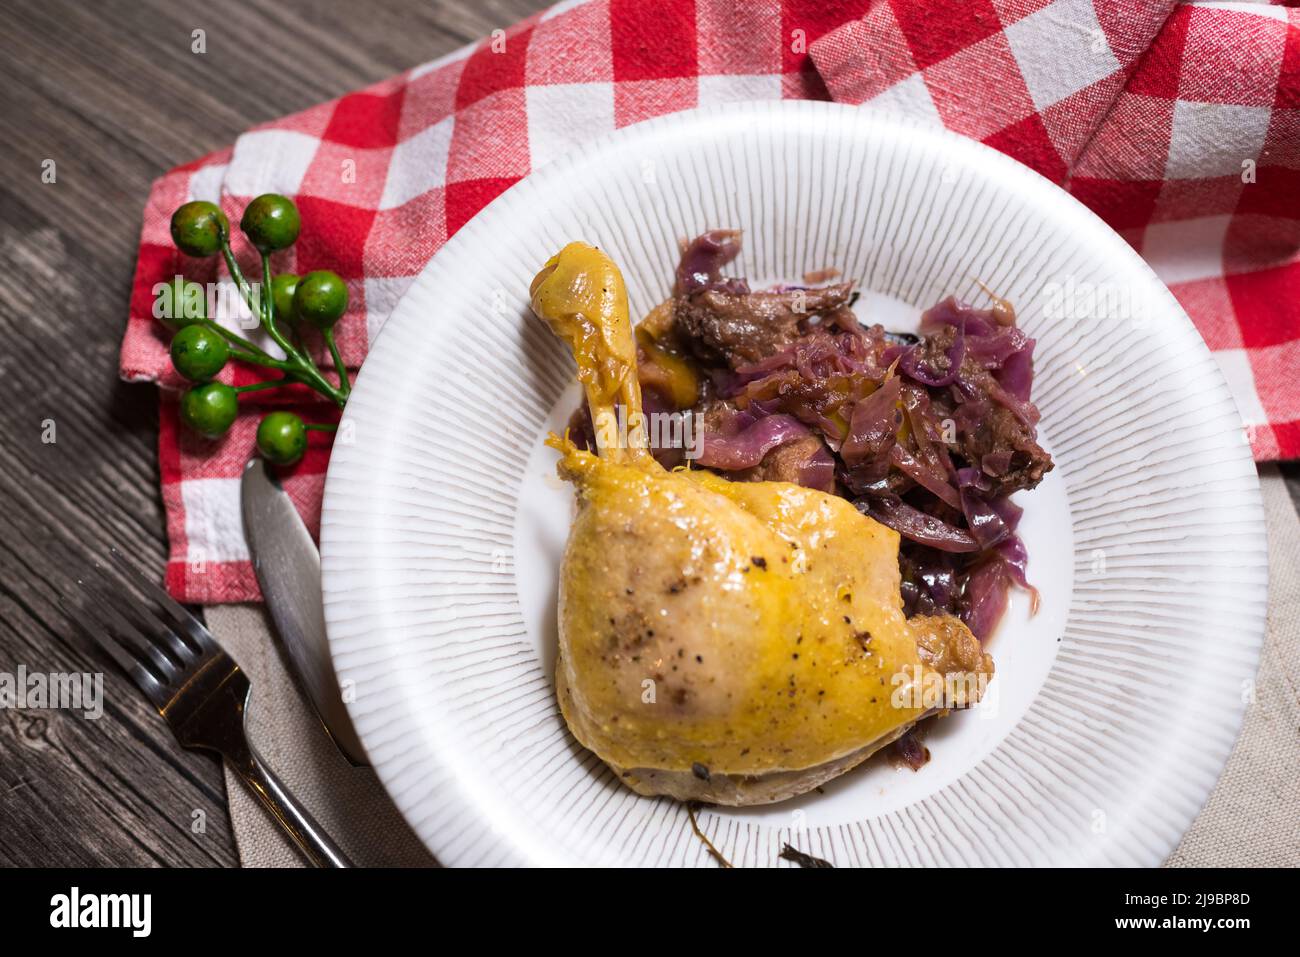 Fried chicken thigh with braised red cabbage. Ugly food photo. View from above. Checkered napkin. Stock Photo